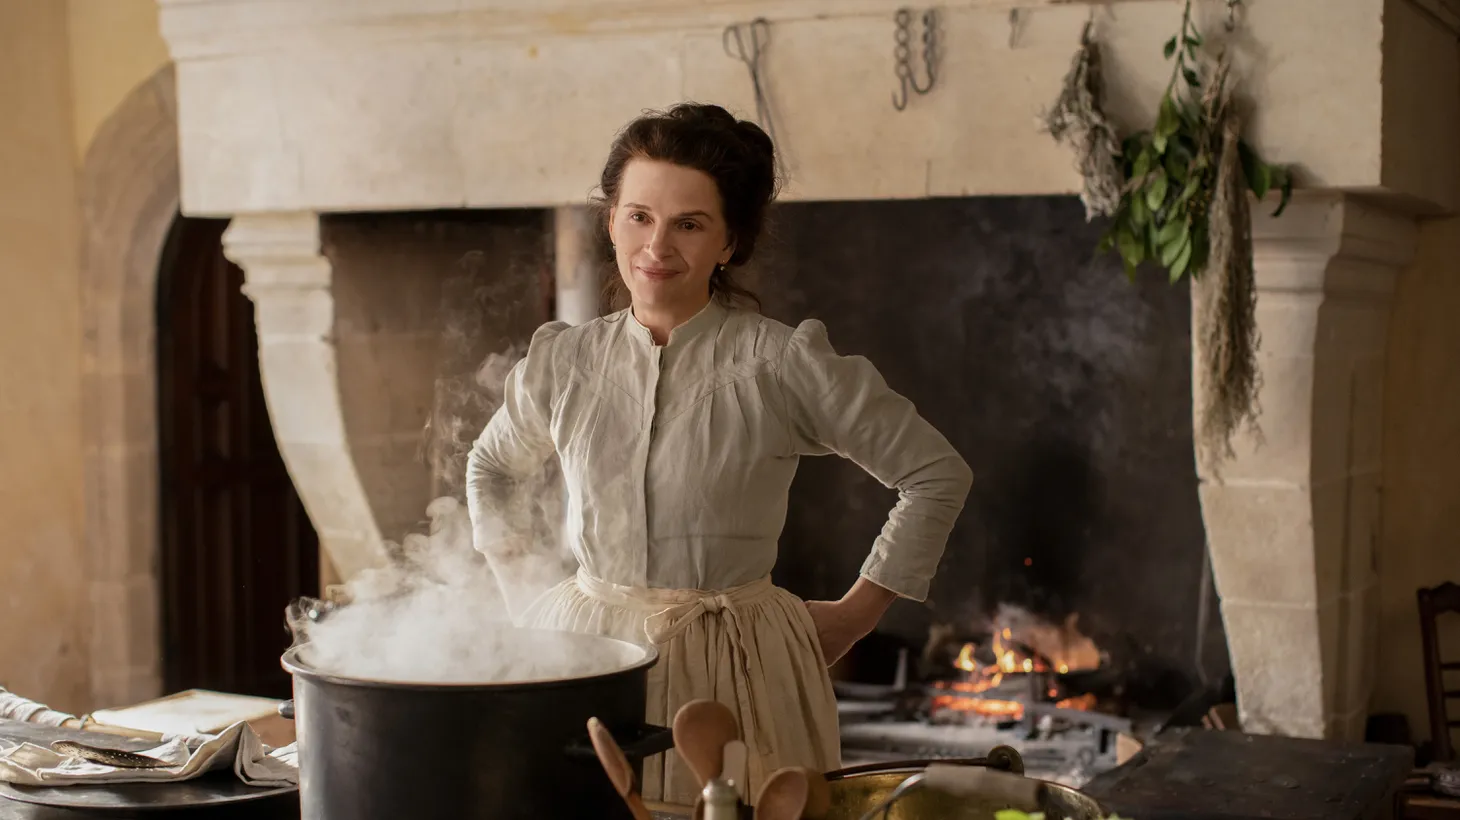 Juliette Binoche plays Eugénie, an artist in the kitchen, in Tran Anh Hung's "The Taste of Things."